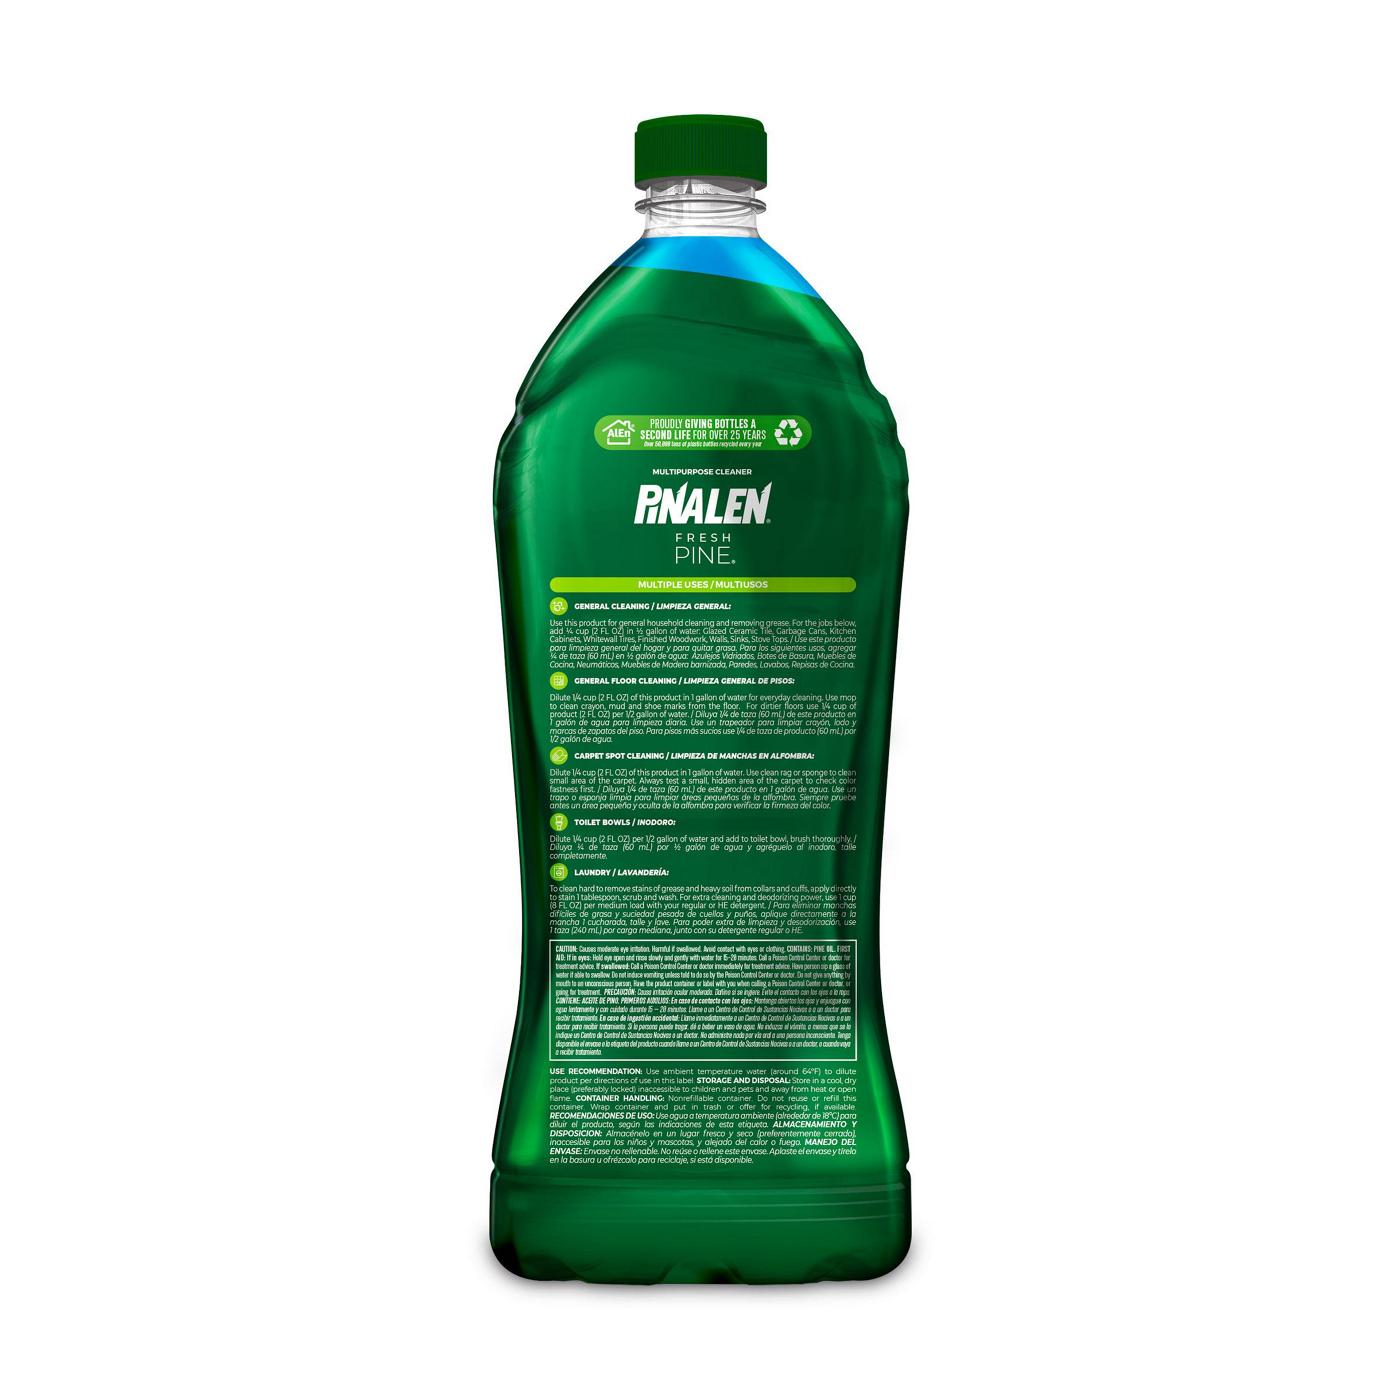 Pinalen Multipurpose Cleaner - Pine Scent; image 2 of 7